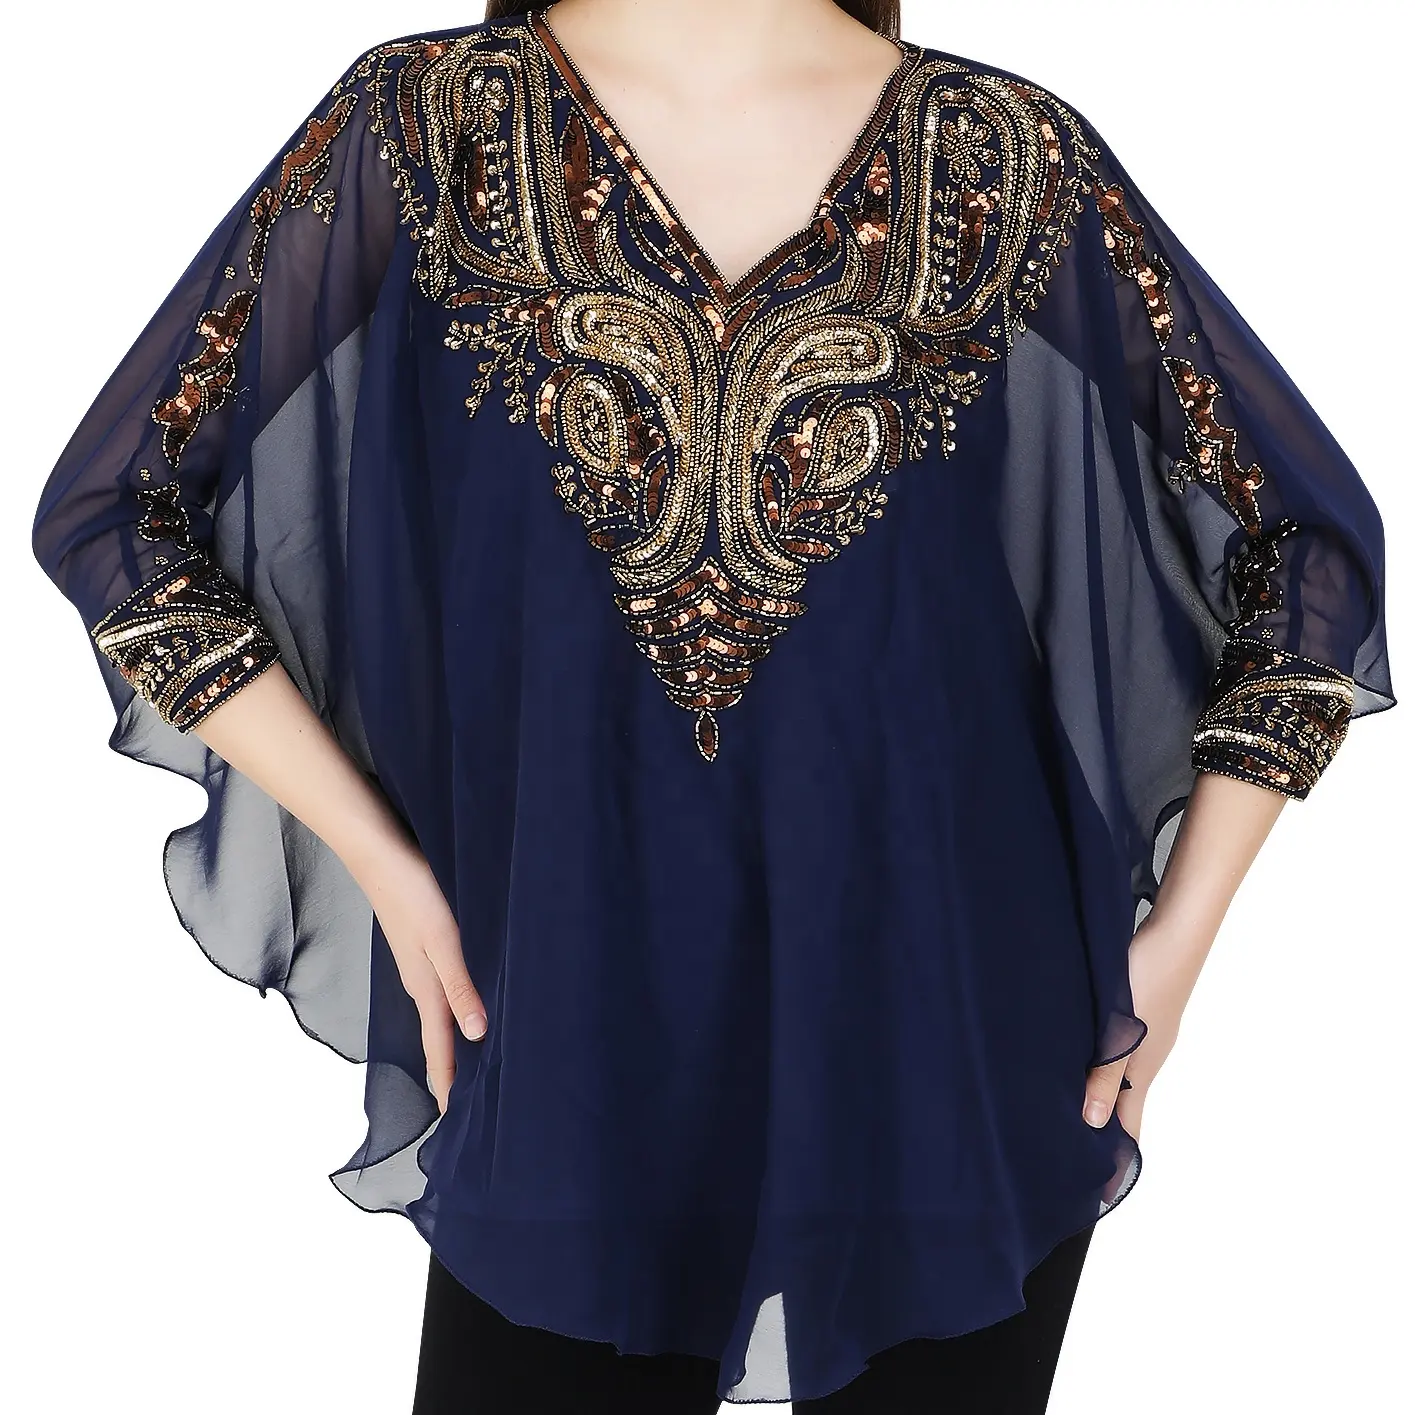 Beautiful Butterfly sleeve Short Kaftan Top good quality Georgette fabric hand embroider work kaftan for girls women's clothing